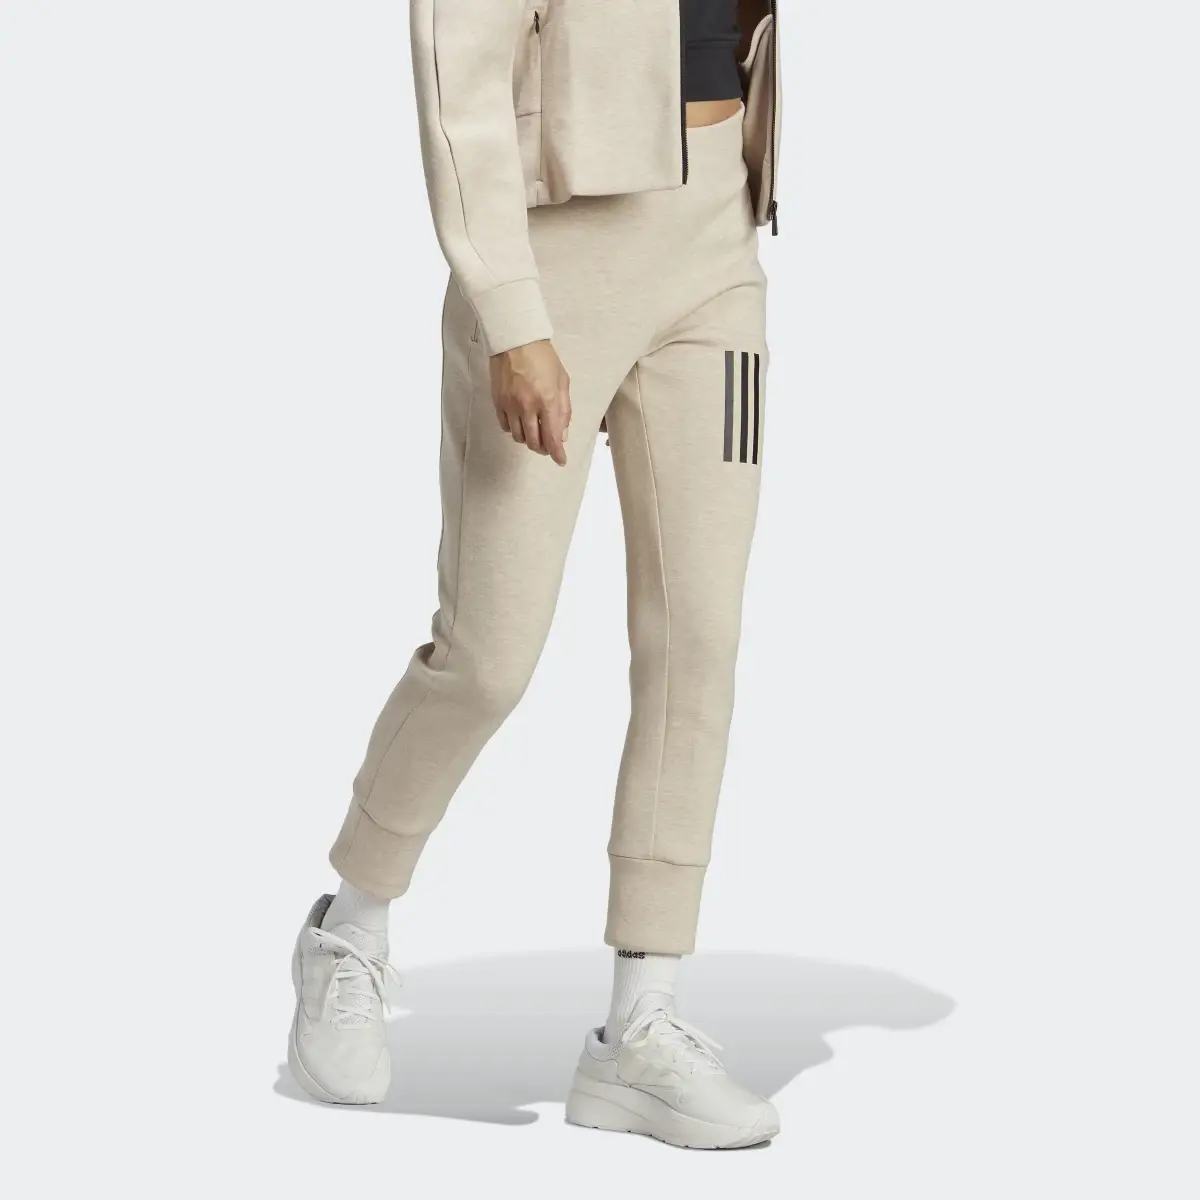 Adidas Mission Victory High-Waist 7/8 Tracksuit Bottoms. 3